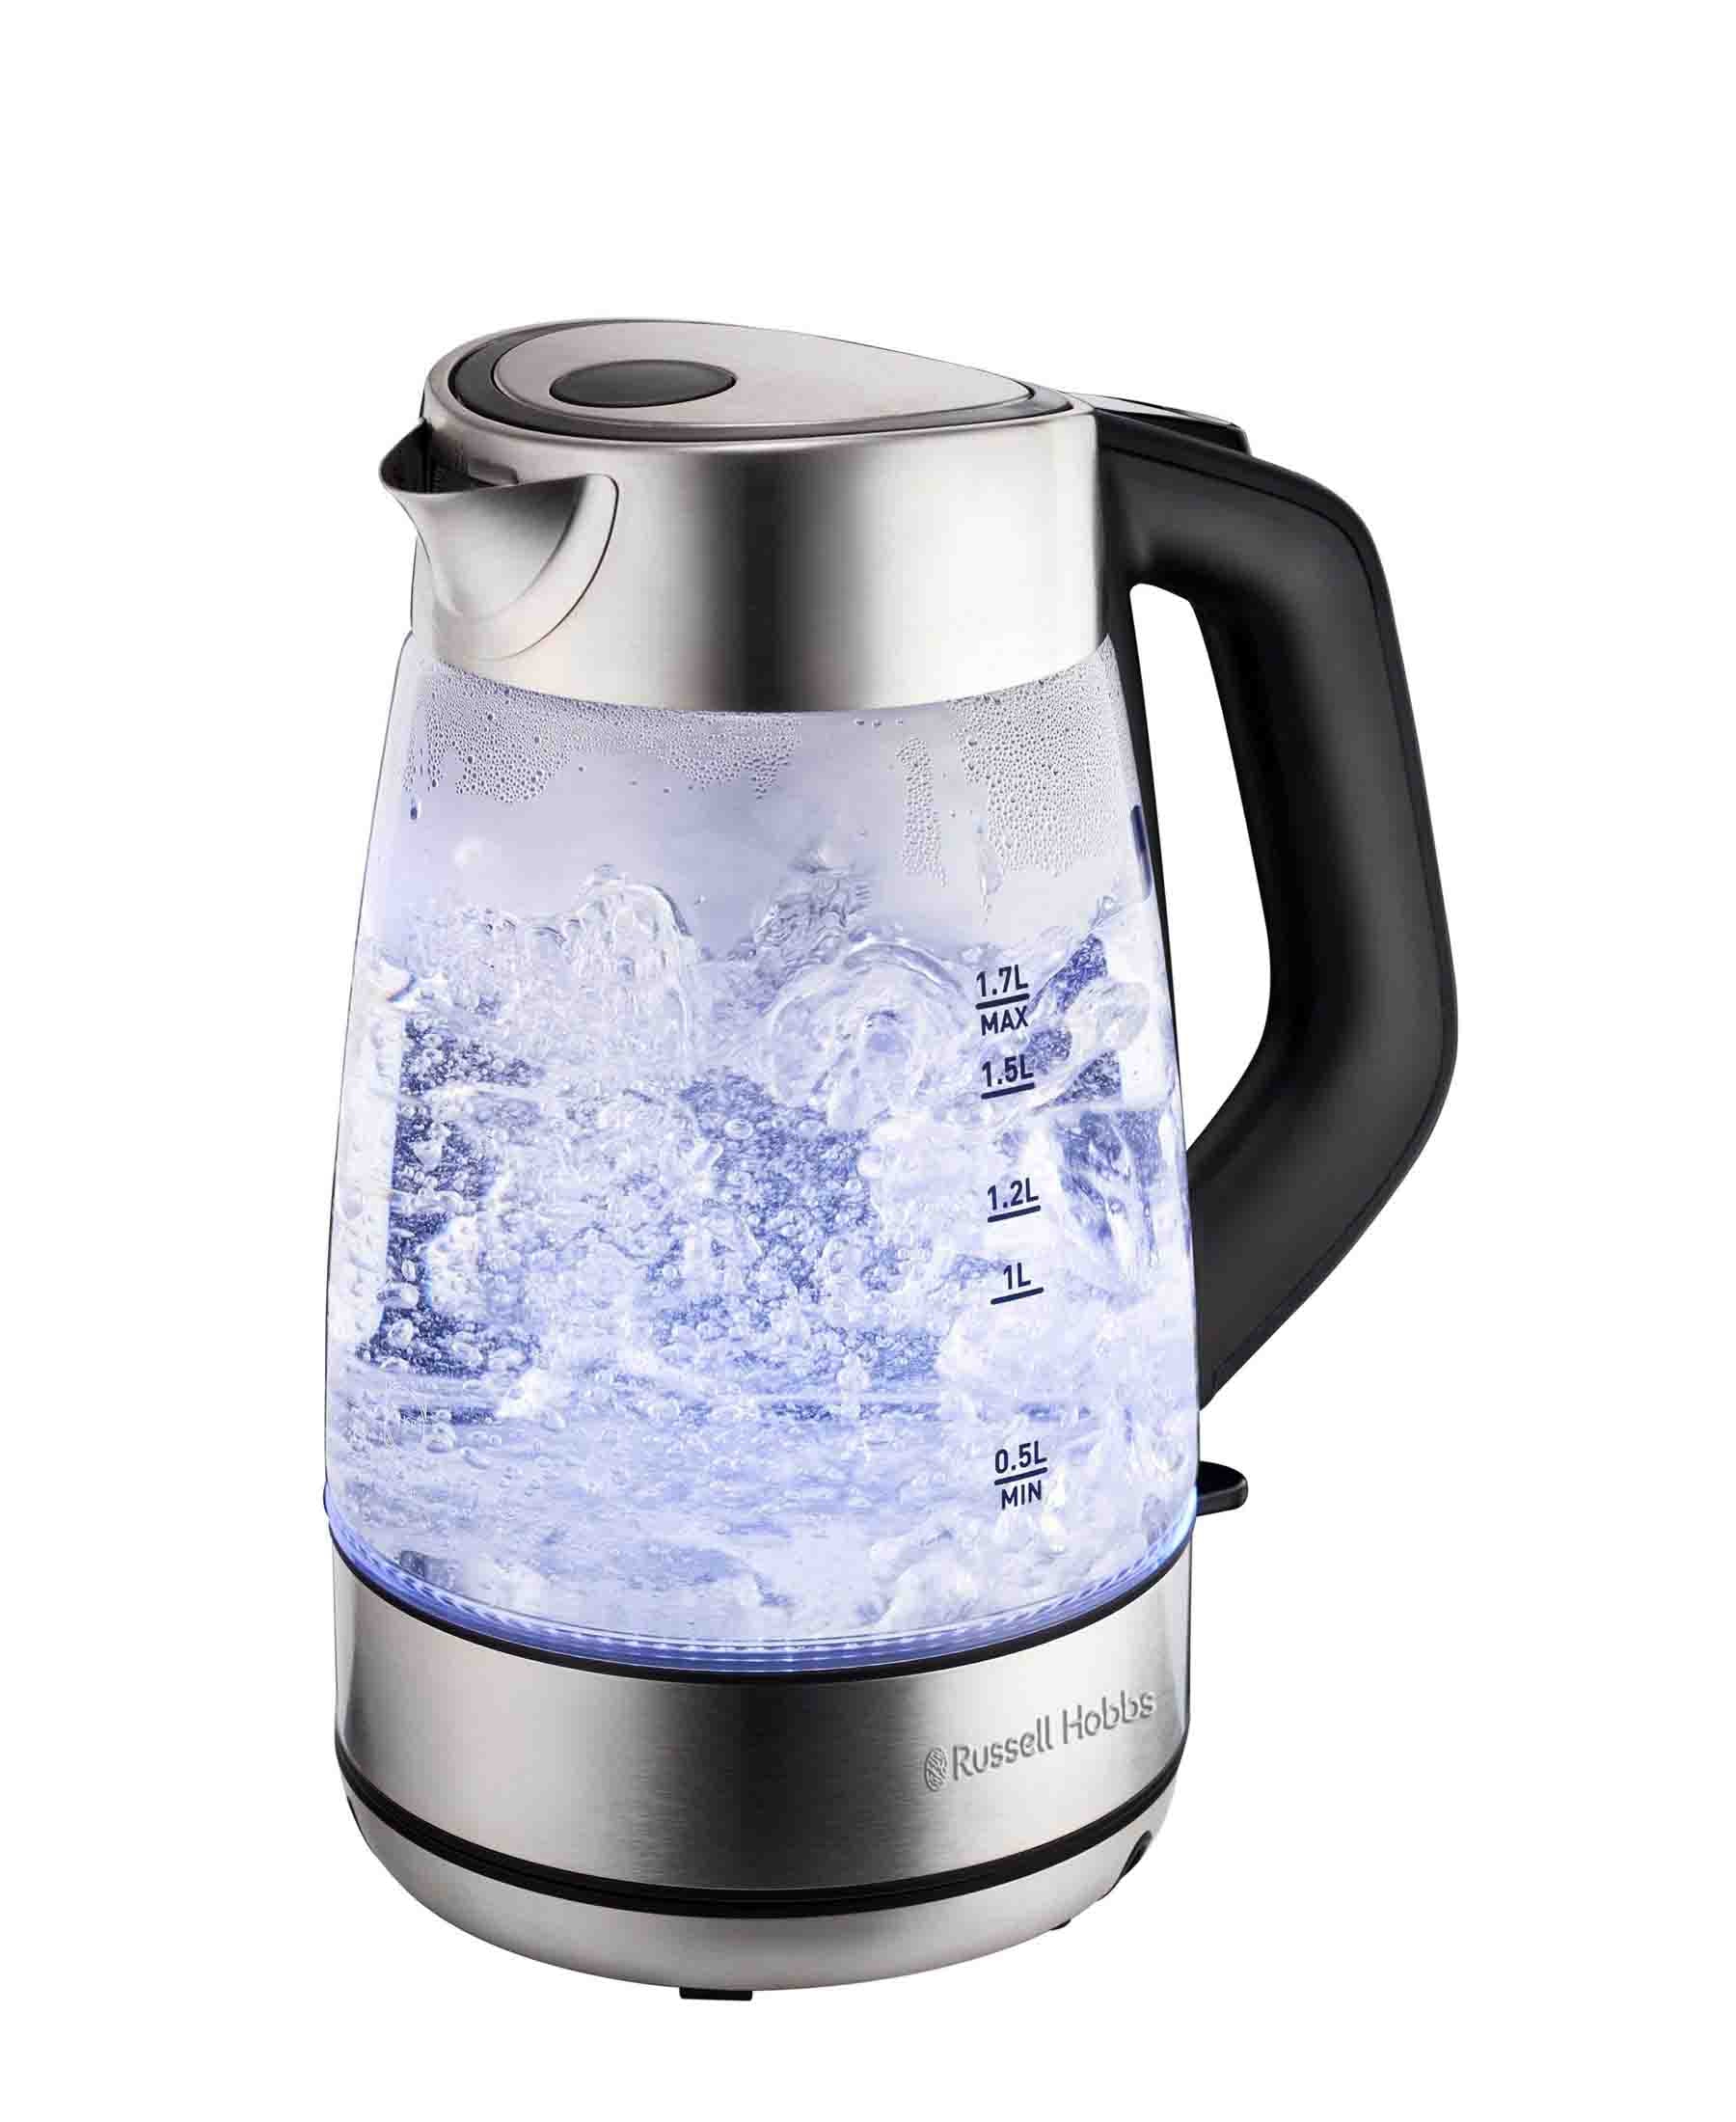 Russell Hobbs 1.7L Glass Kettle - Clear